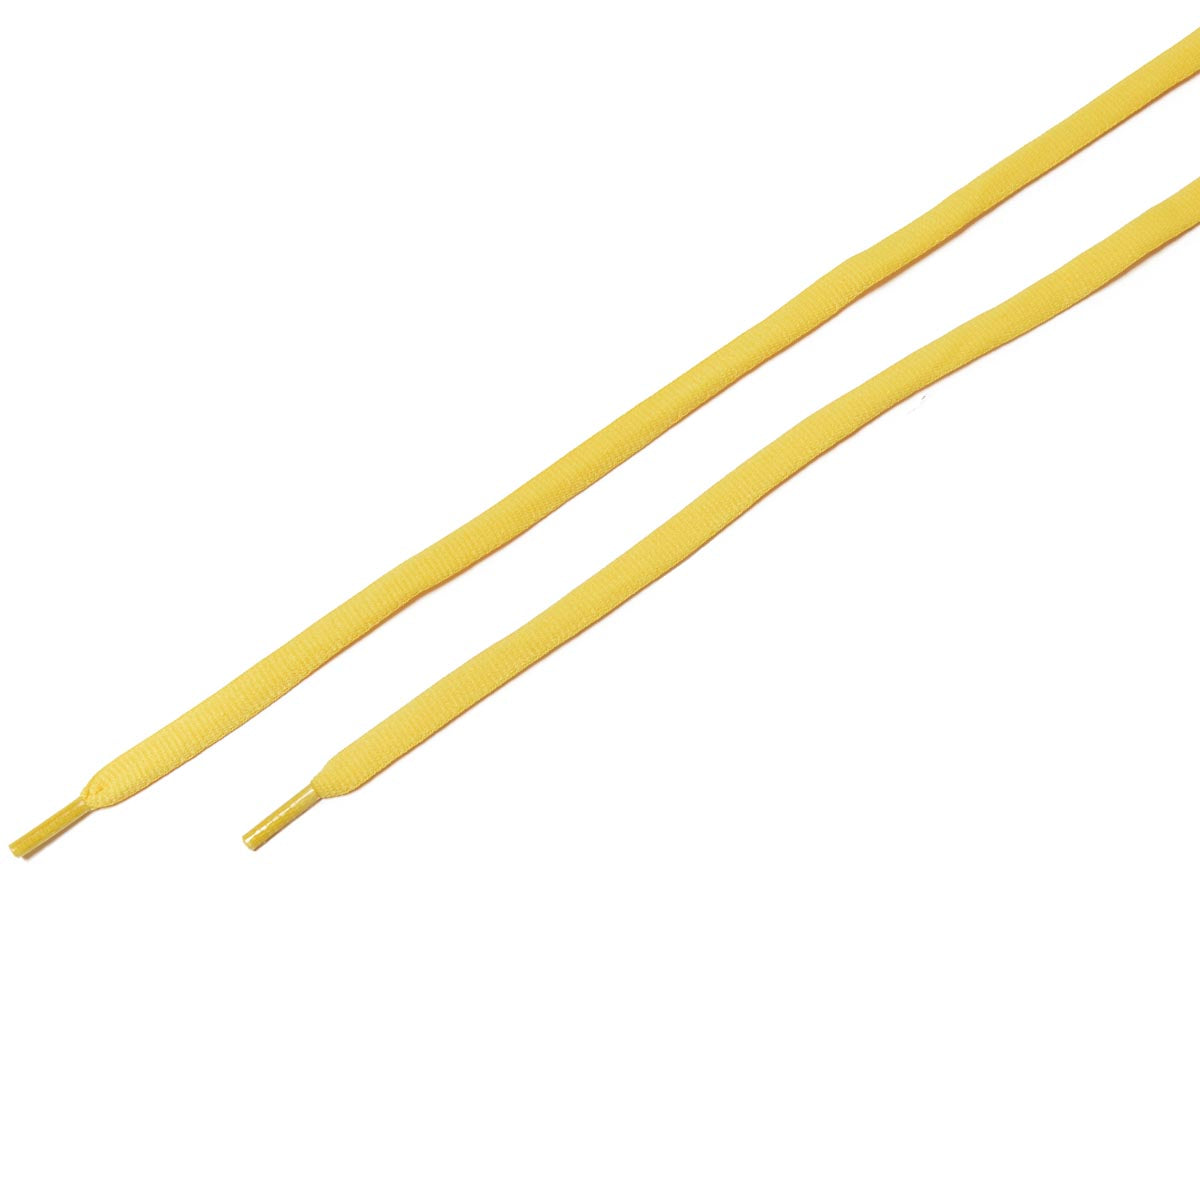 CCS Oval Shoelaces - Yellow image 2